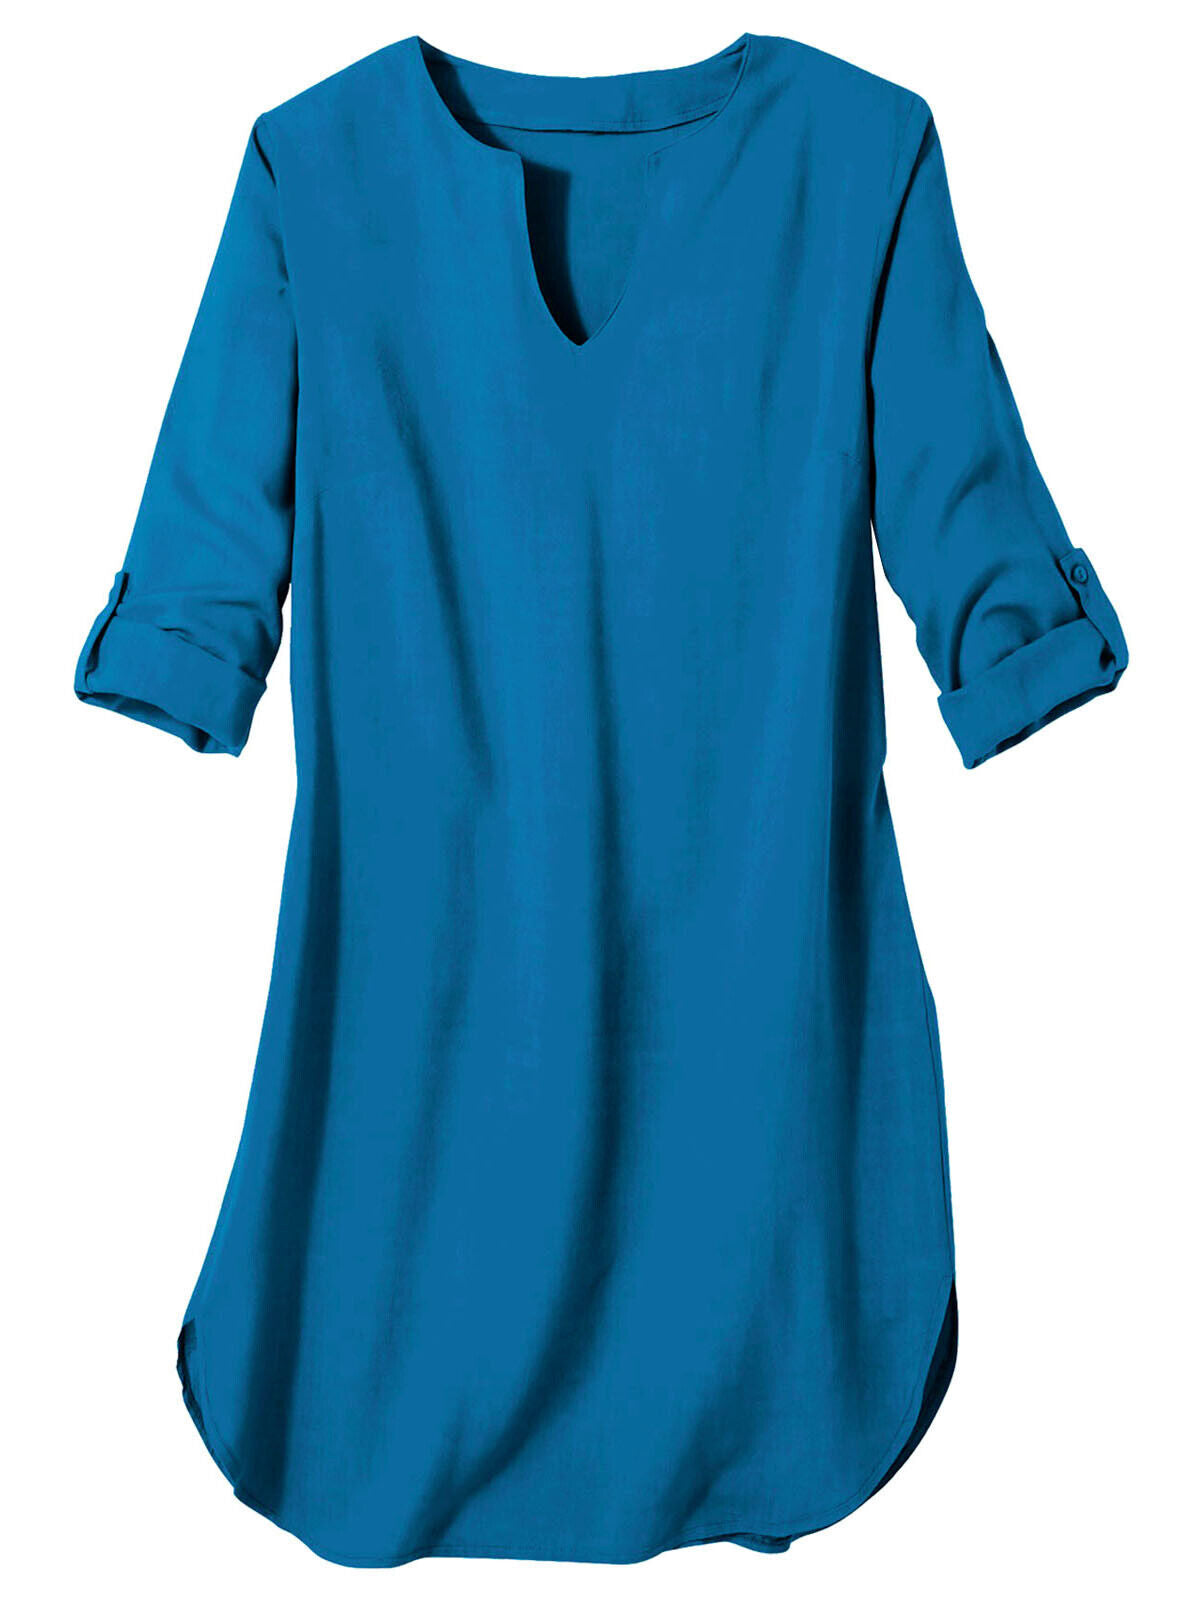 Blancheporte Clay Blue Woven Roll Sleeve Top in Sizes 14, 16, 18, 26